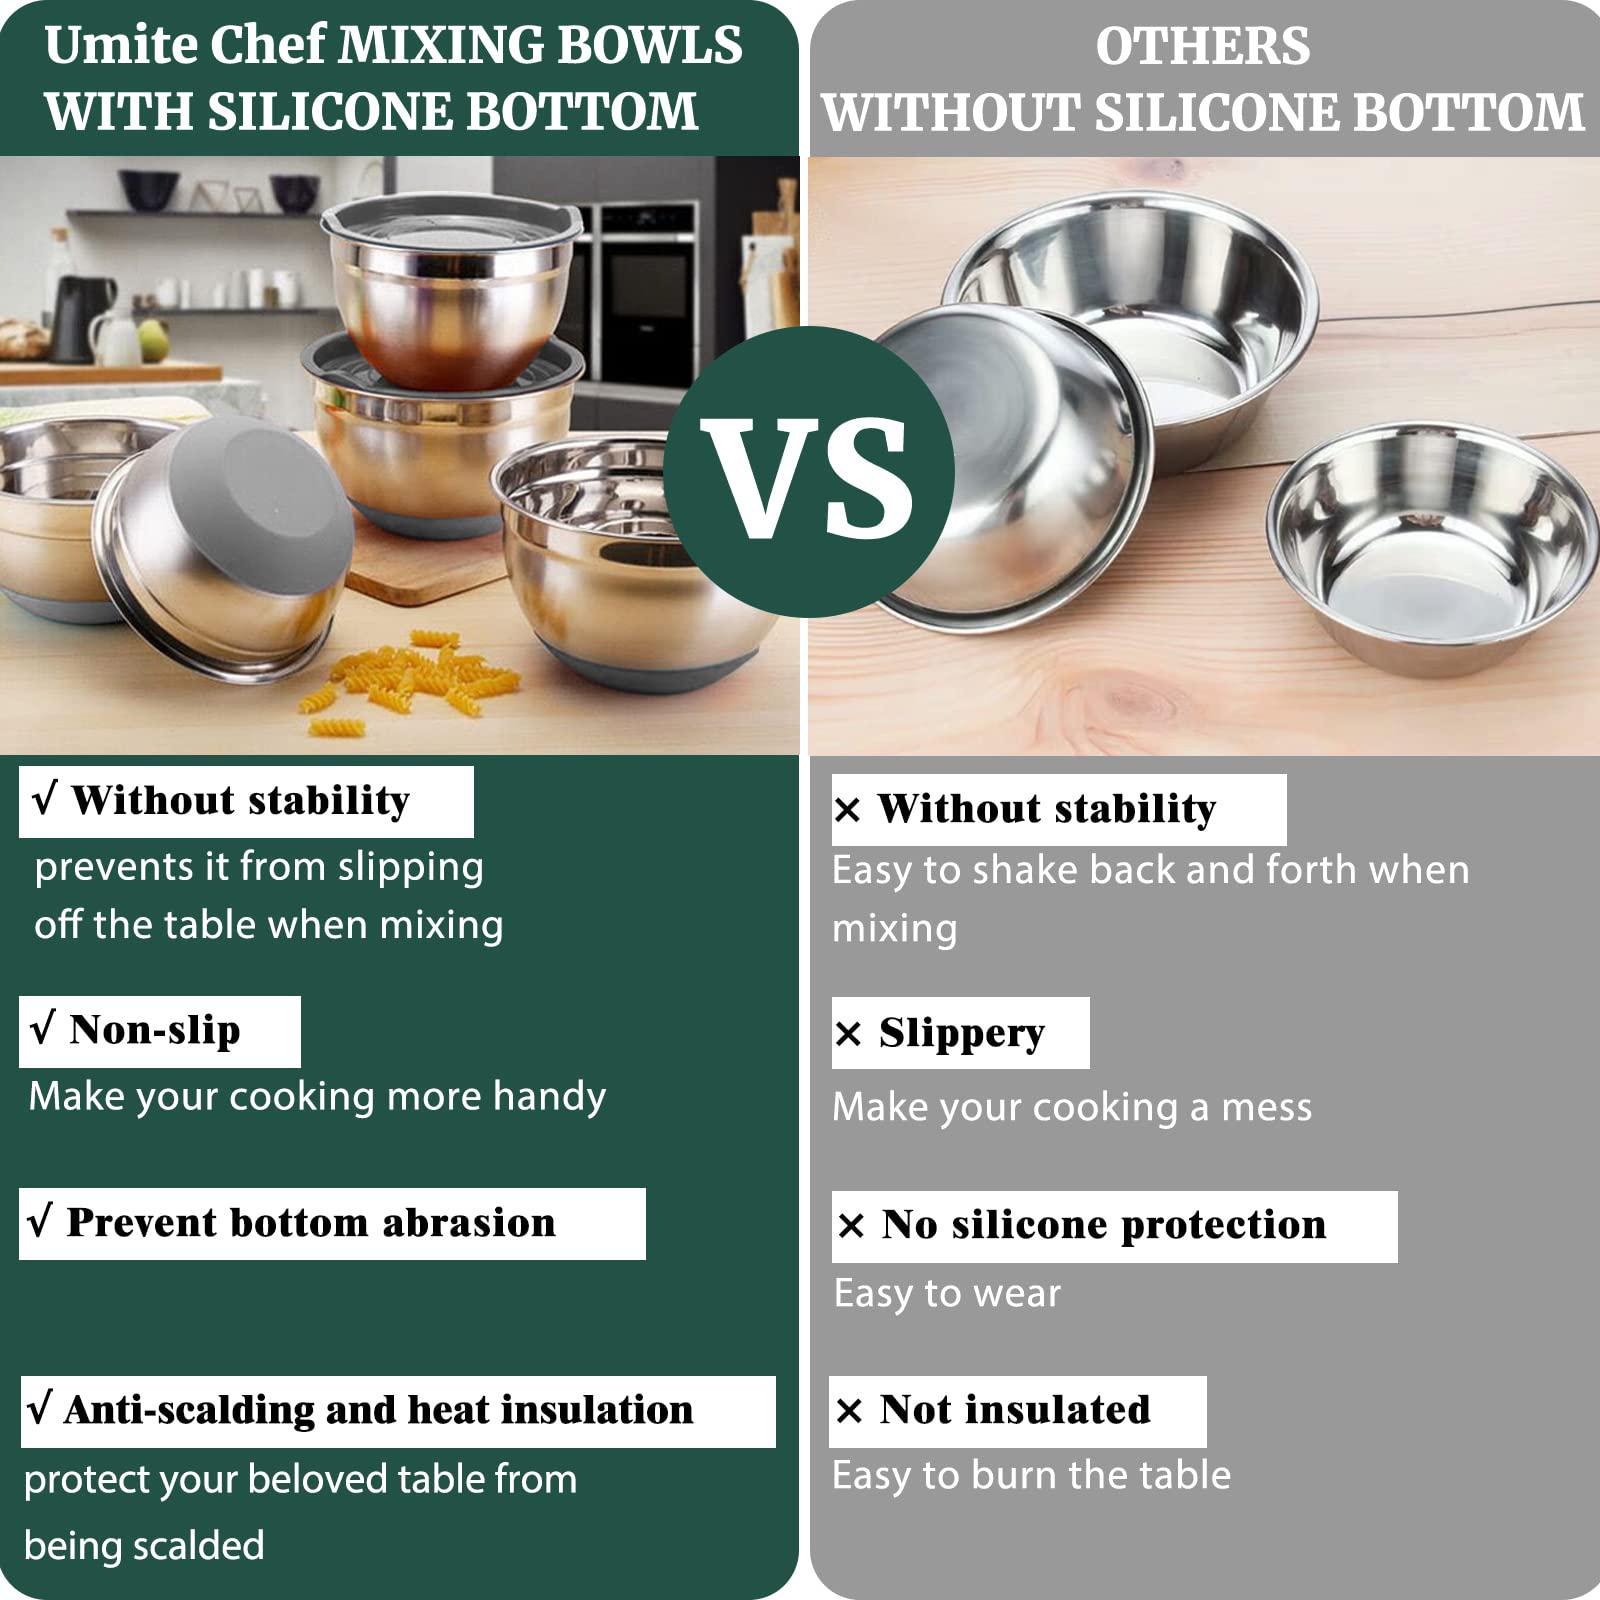 umite chef mixing bowls with airtight lids?6 piece stainless steel metal nesting storage bowls, non-slip bottoms size 7, 3.5,